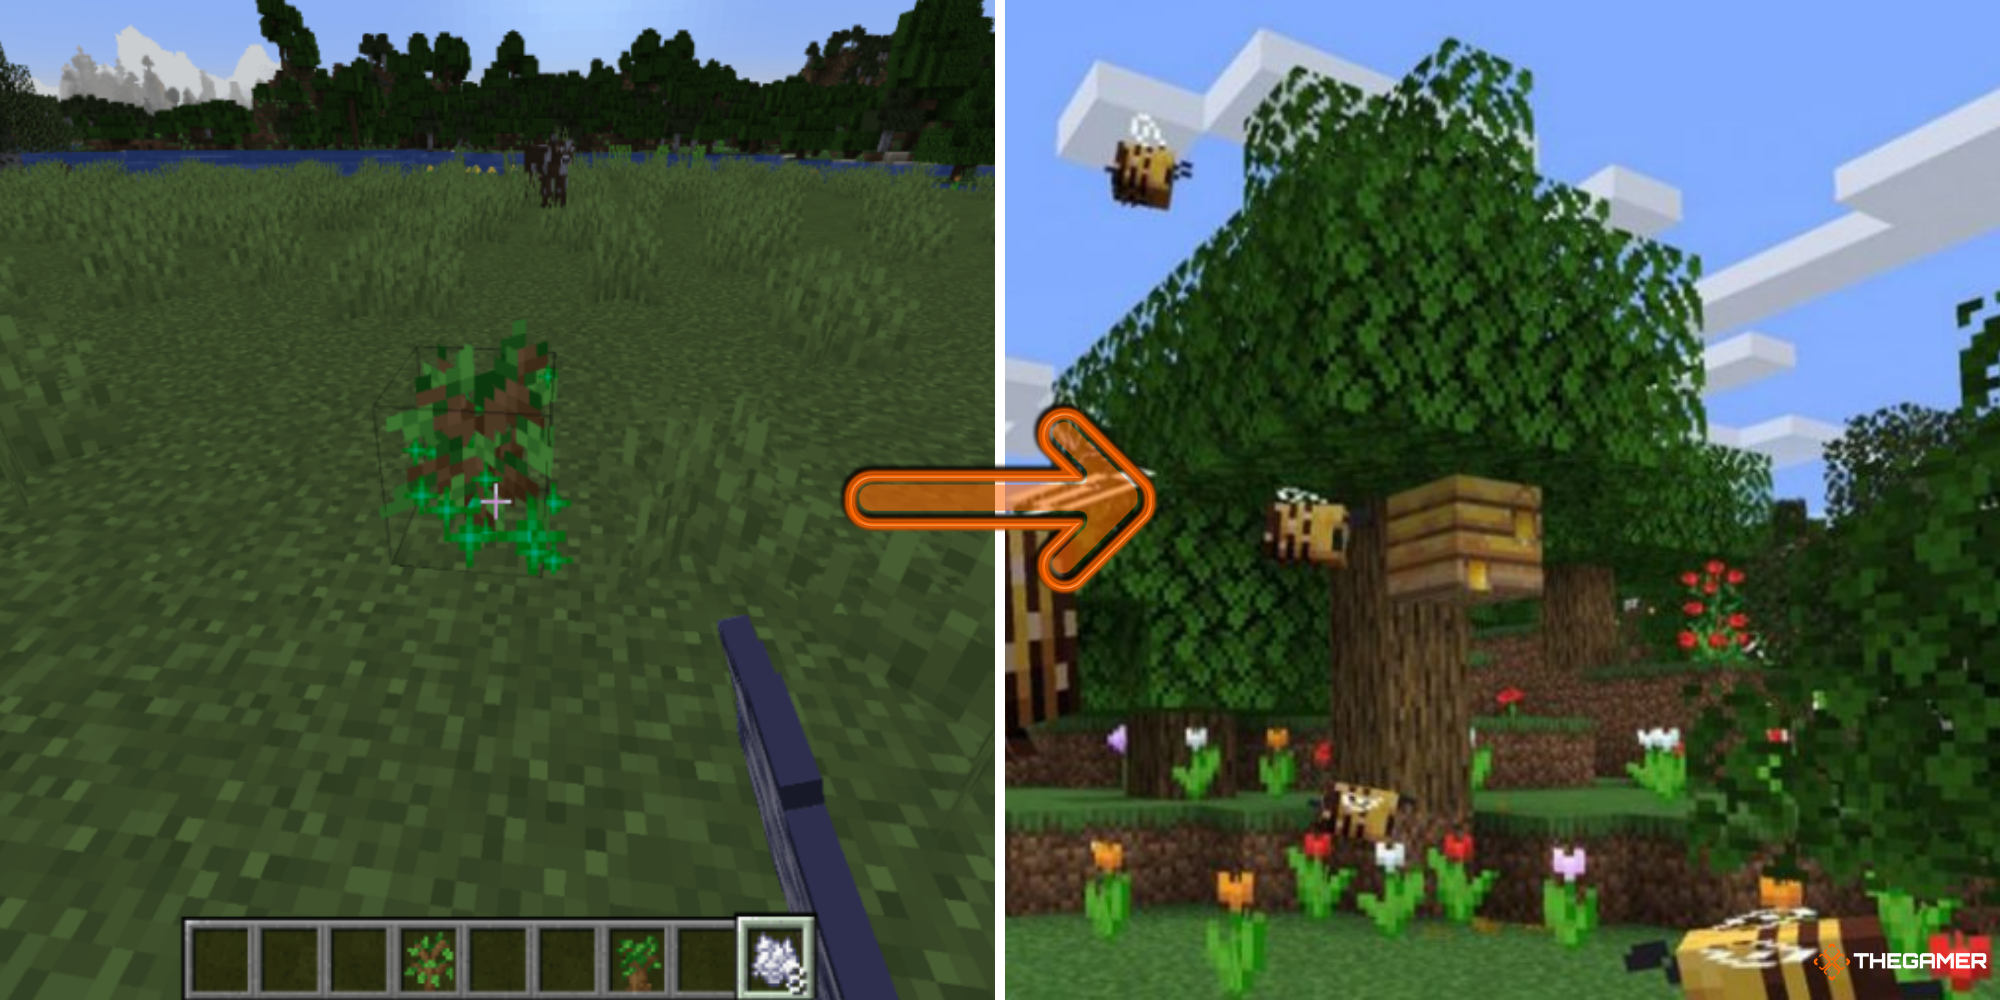 Minecraft - Sapling on left, Full-grown tree with a Bee Nest on right